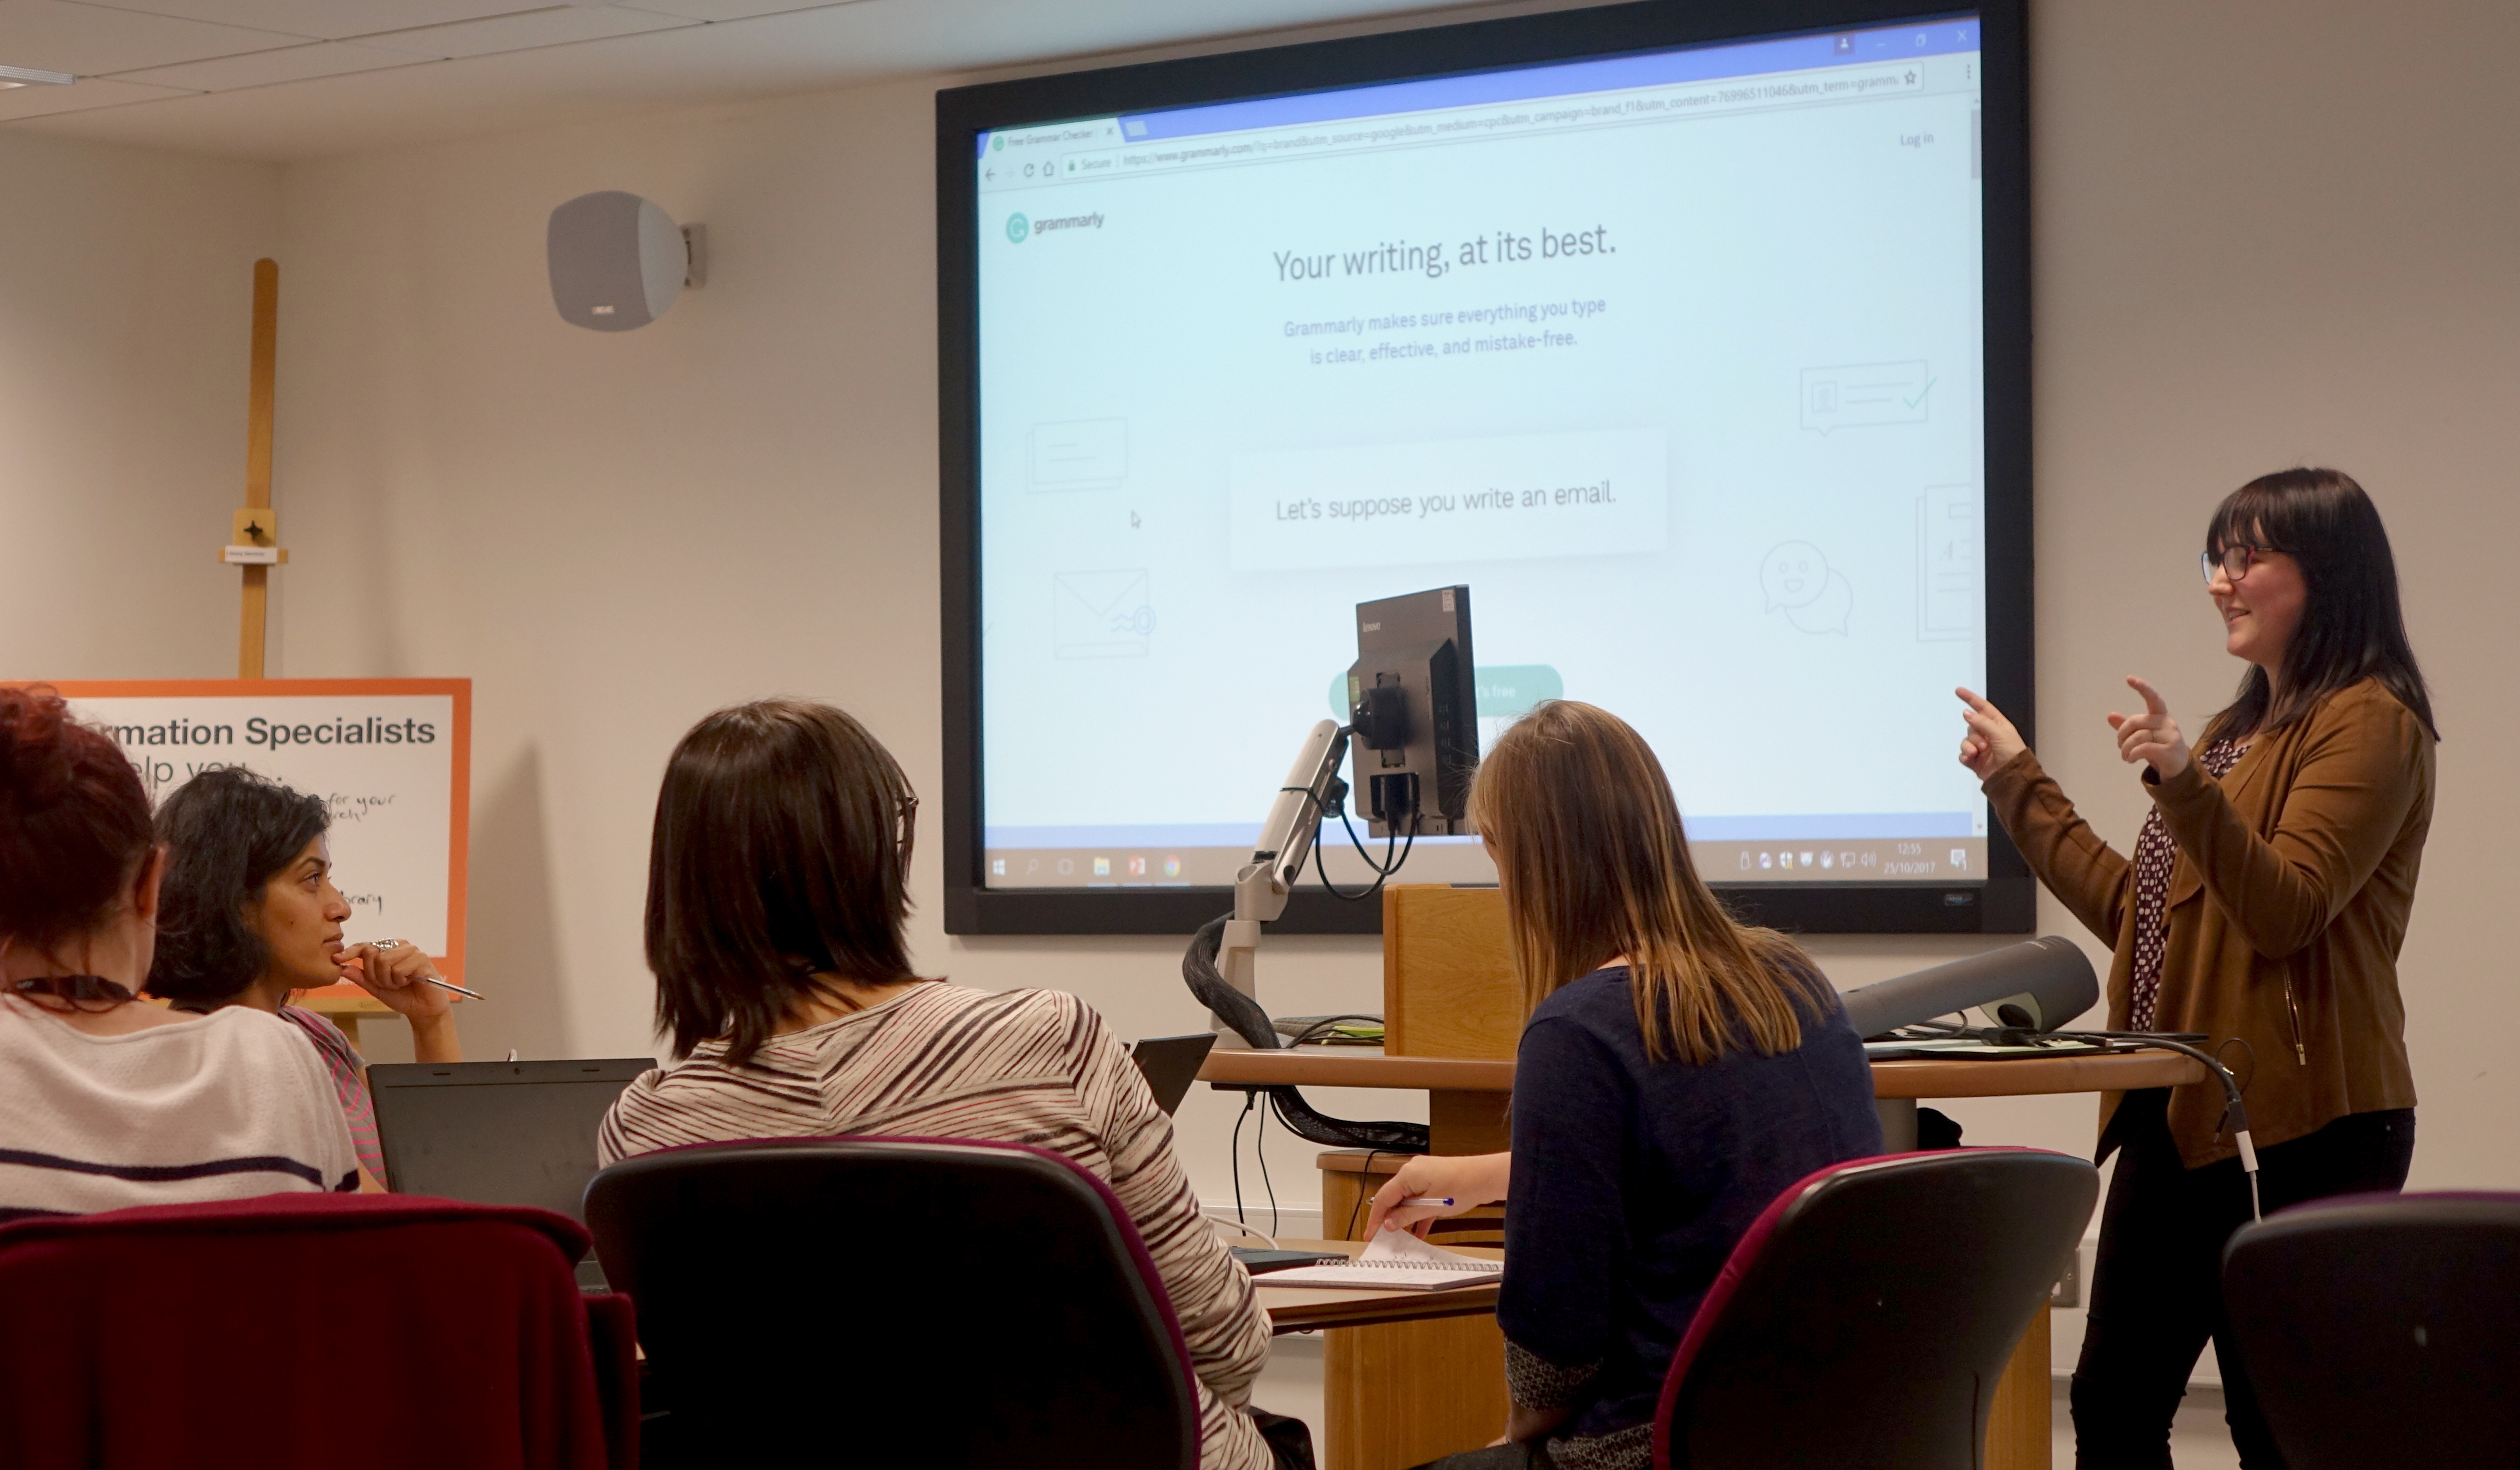 An AbilityNet member of staff giving a presentation in front of university staff